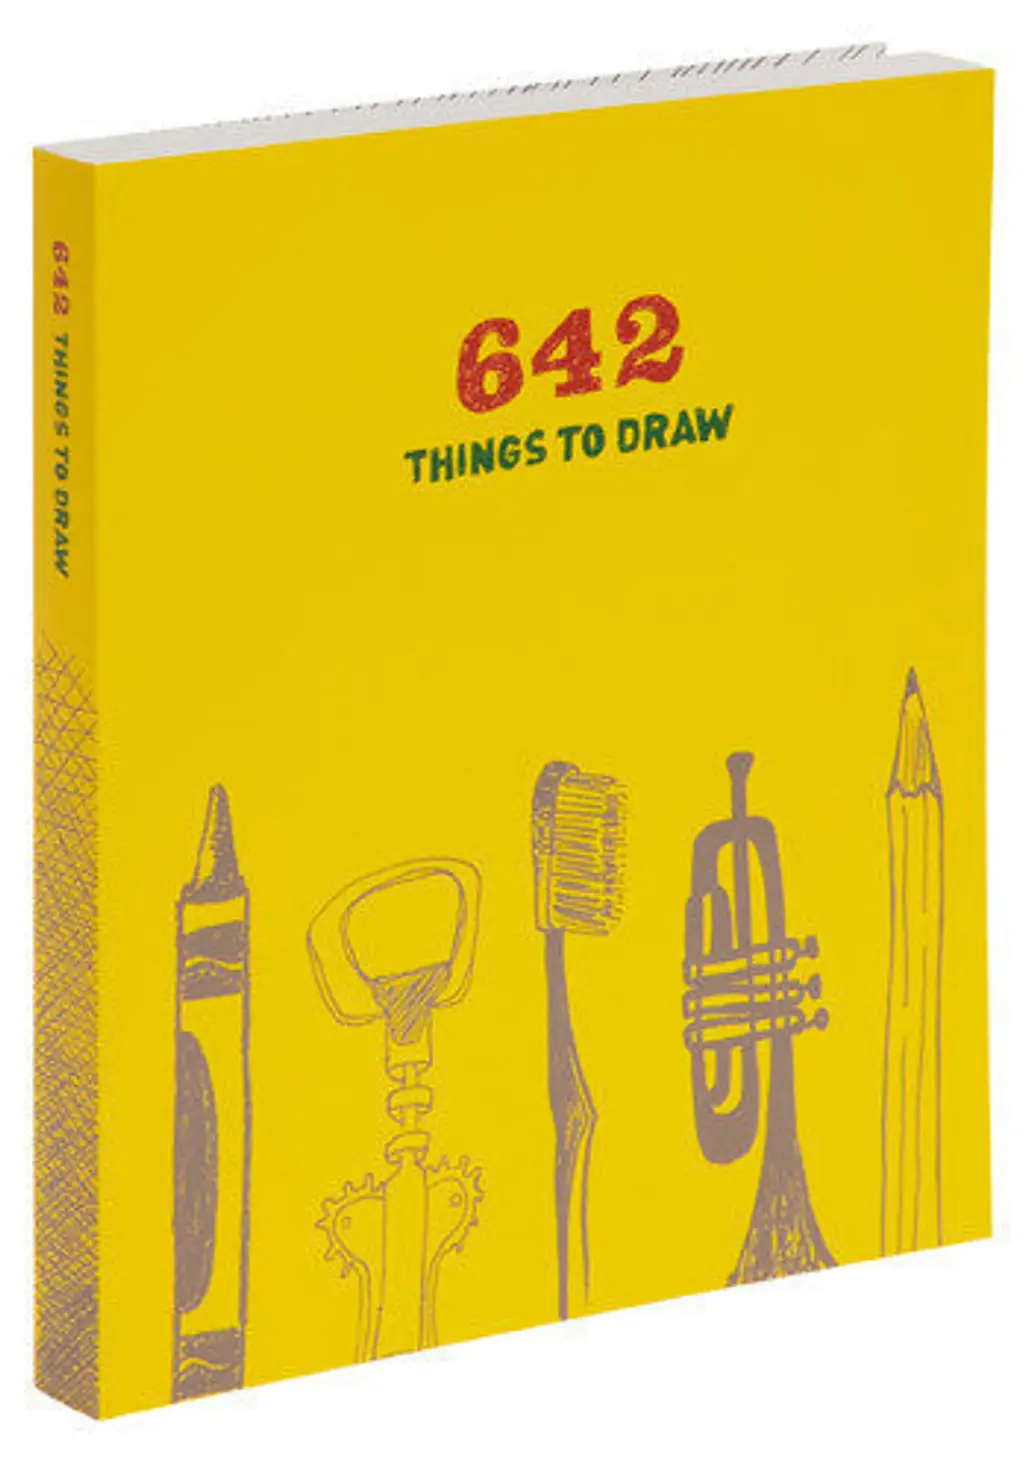 “642 Things to Draw” by Eloise Leigh